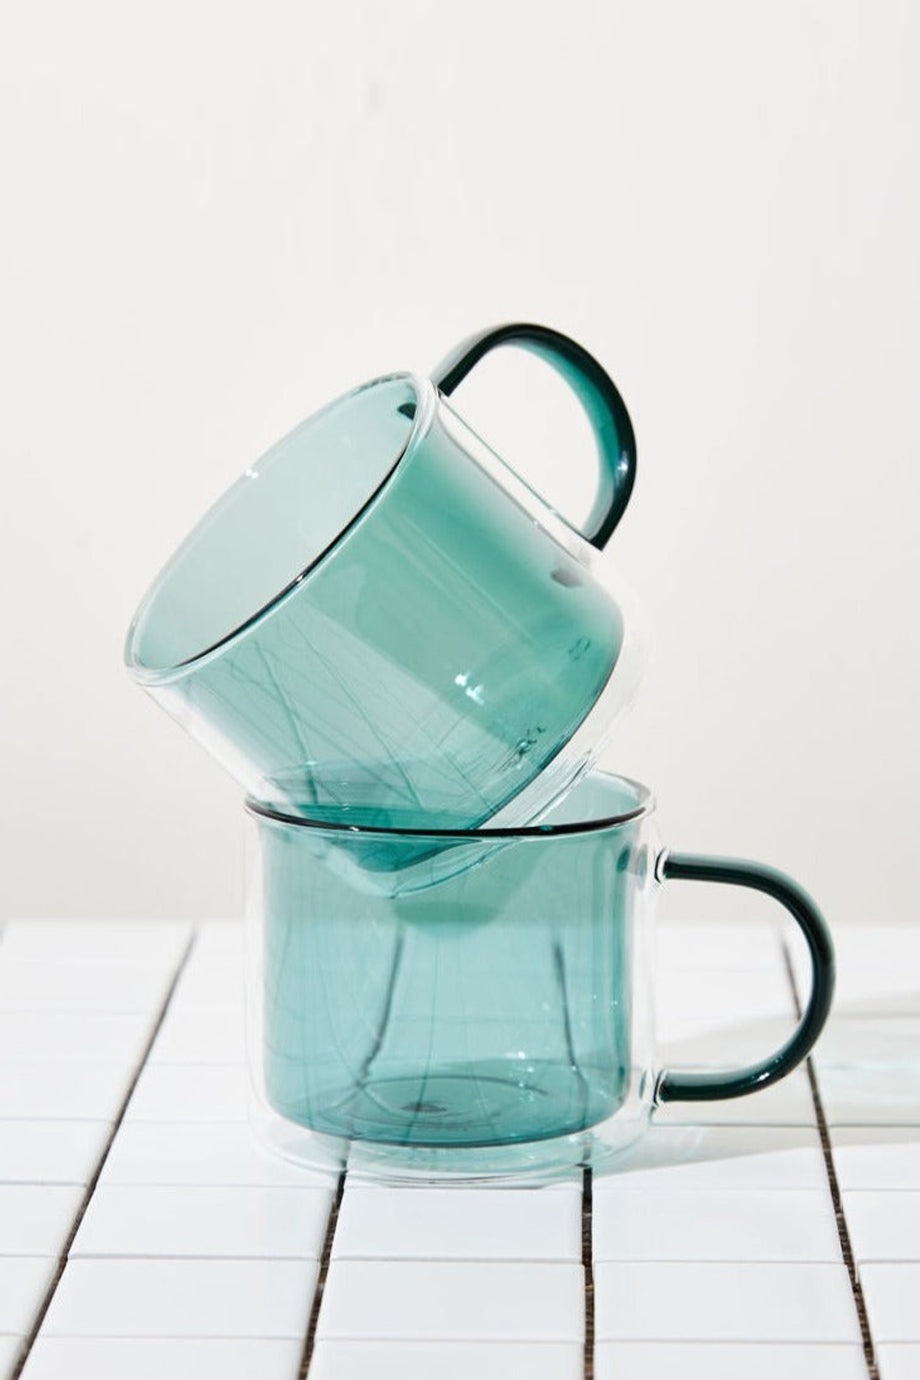 Husk Trouble Cup - Teal